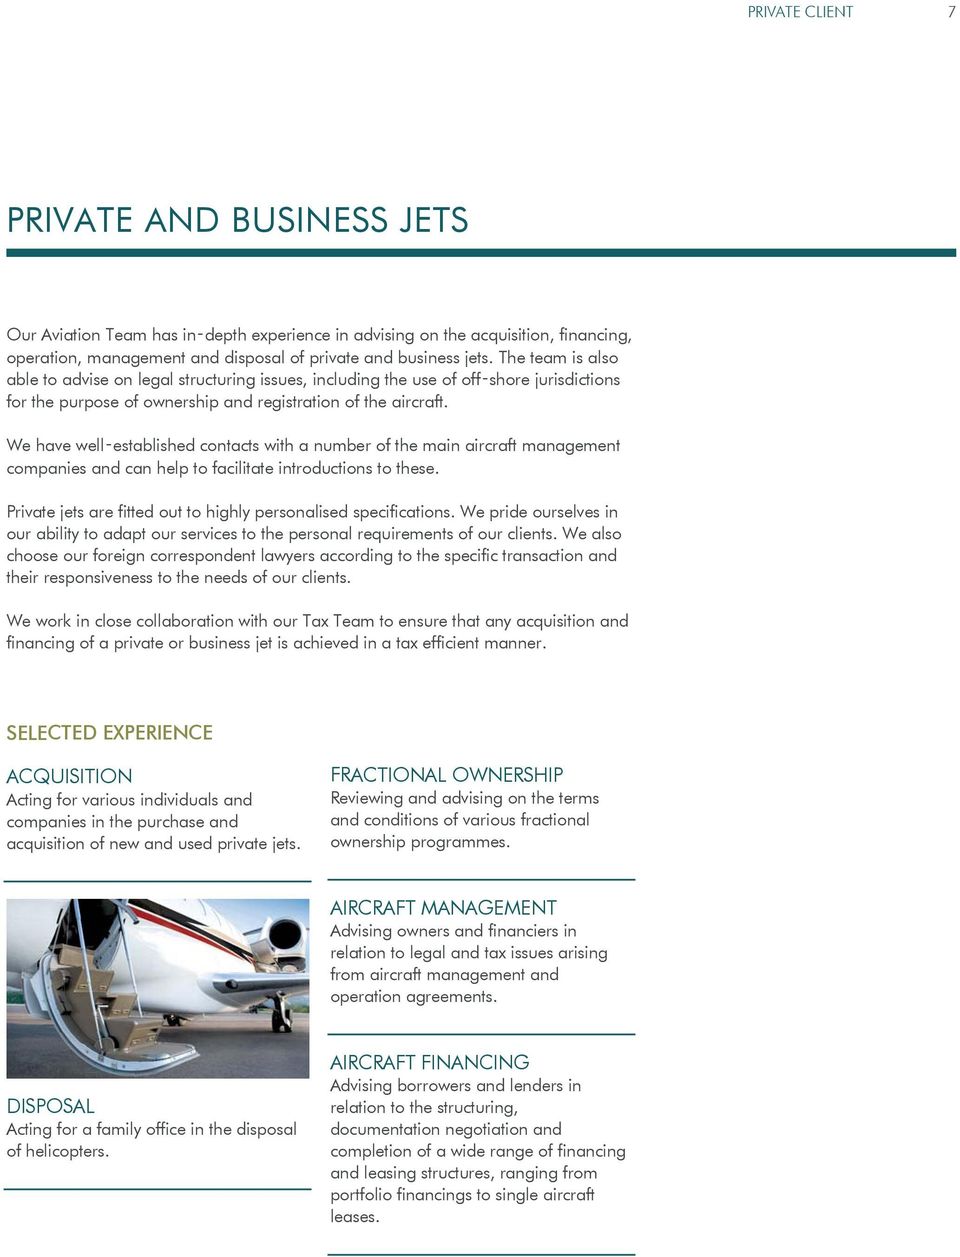 We have well established contacts with a number of the main aircraft management companies and can help to facilitate introductions to these.